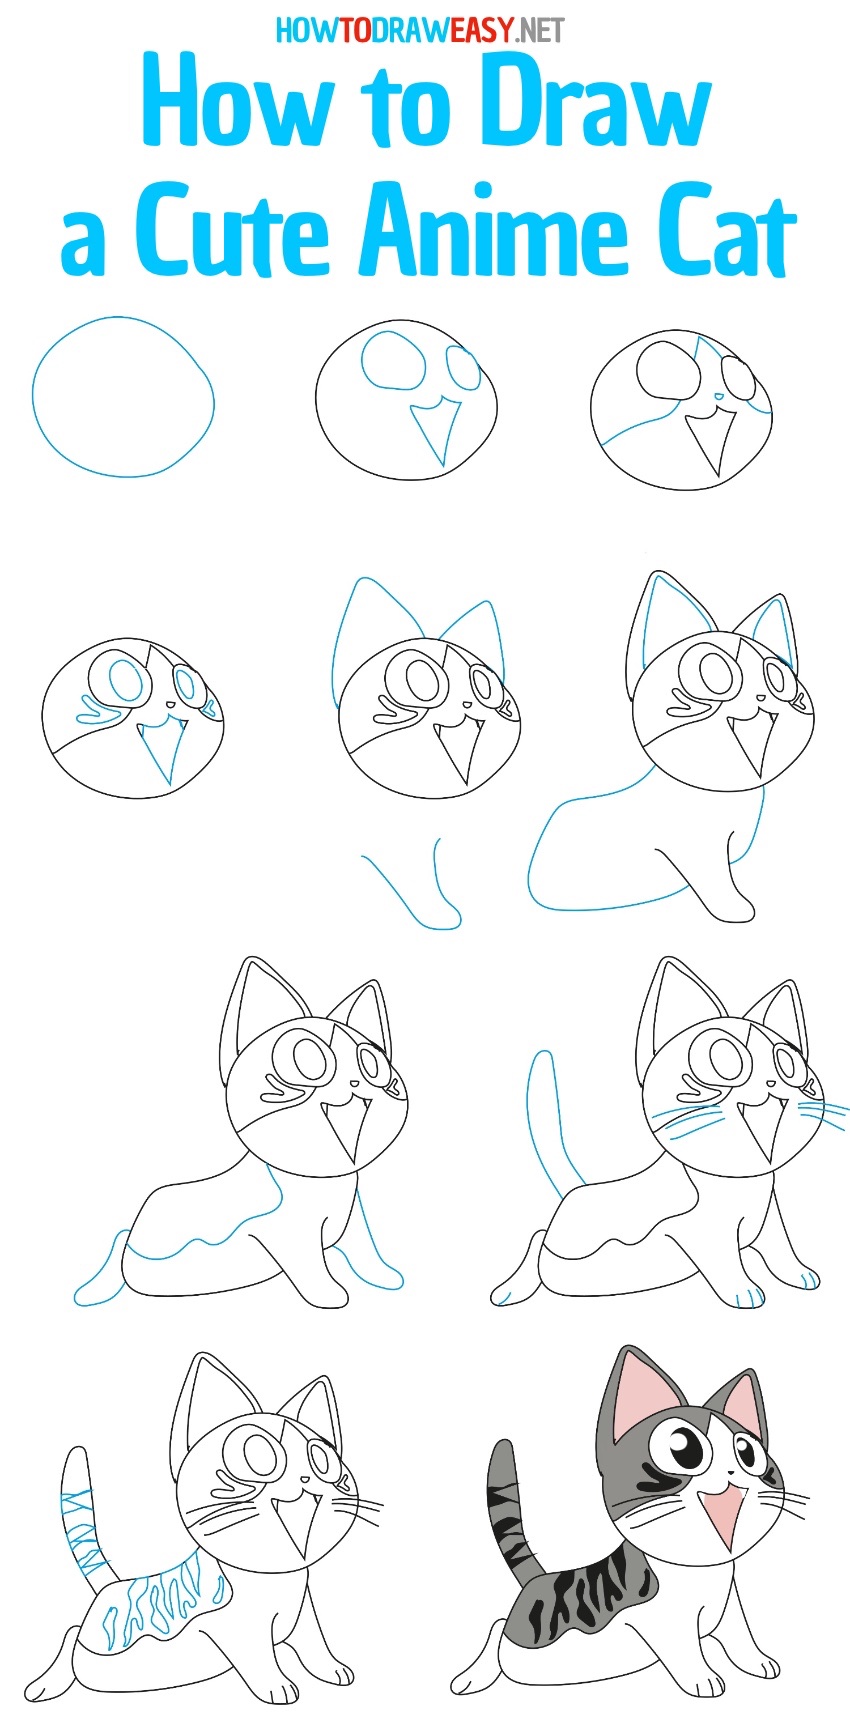 How to Draw a Cute Anime Cat